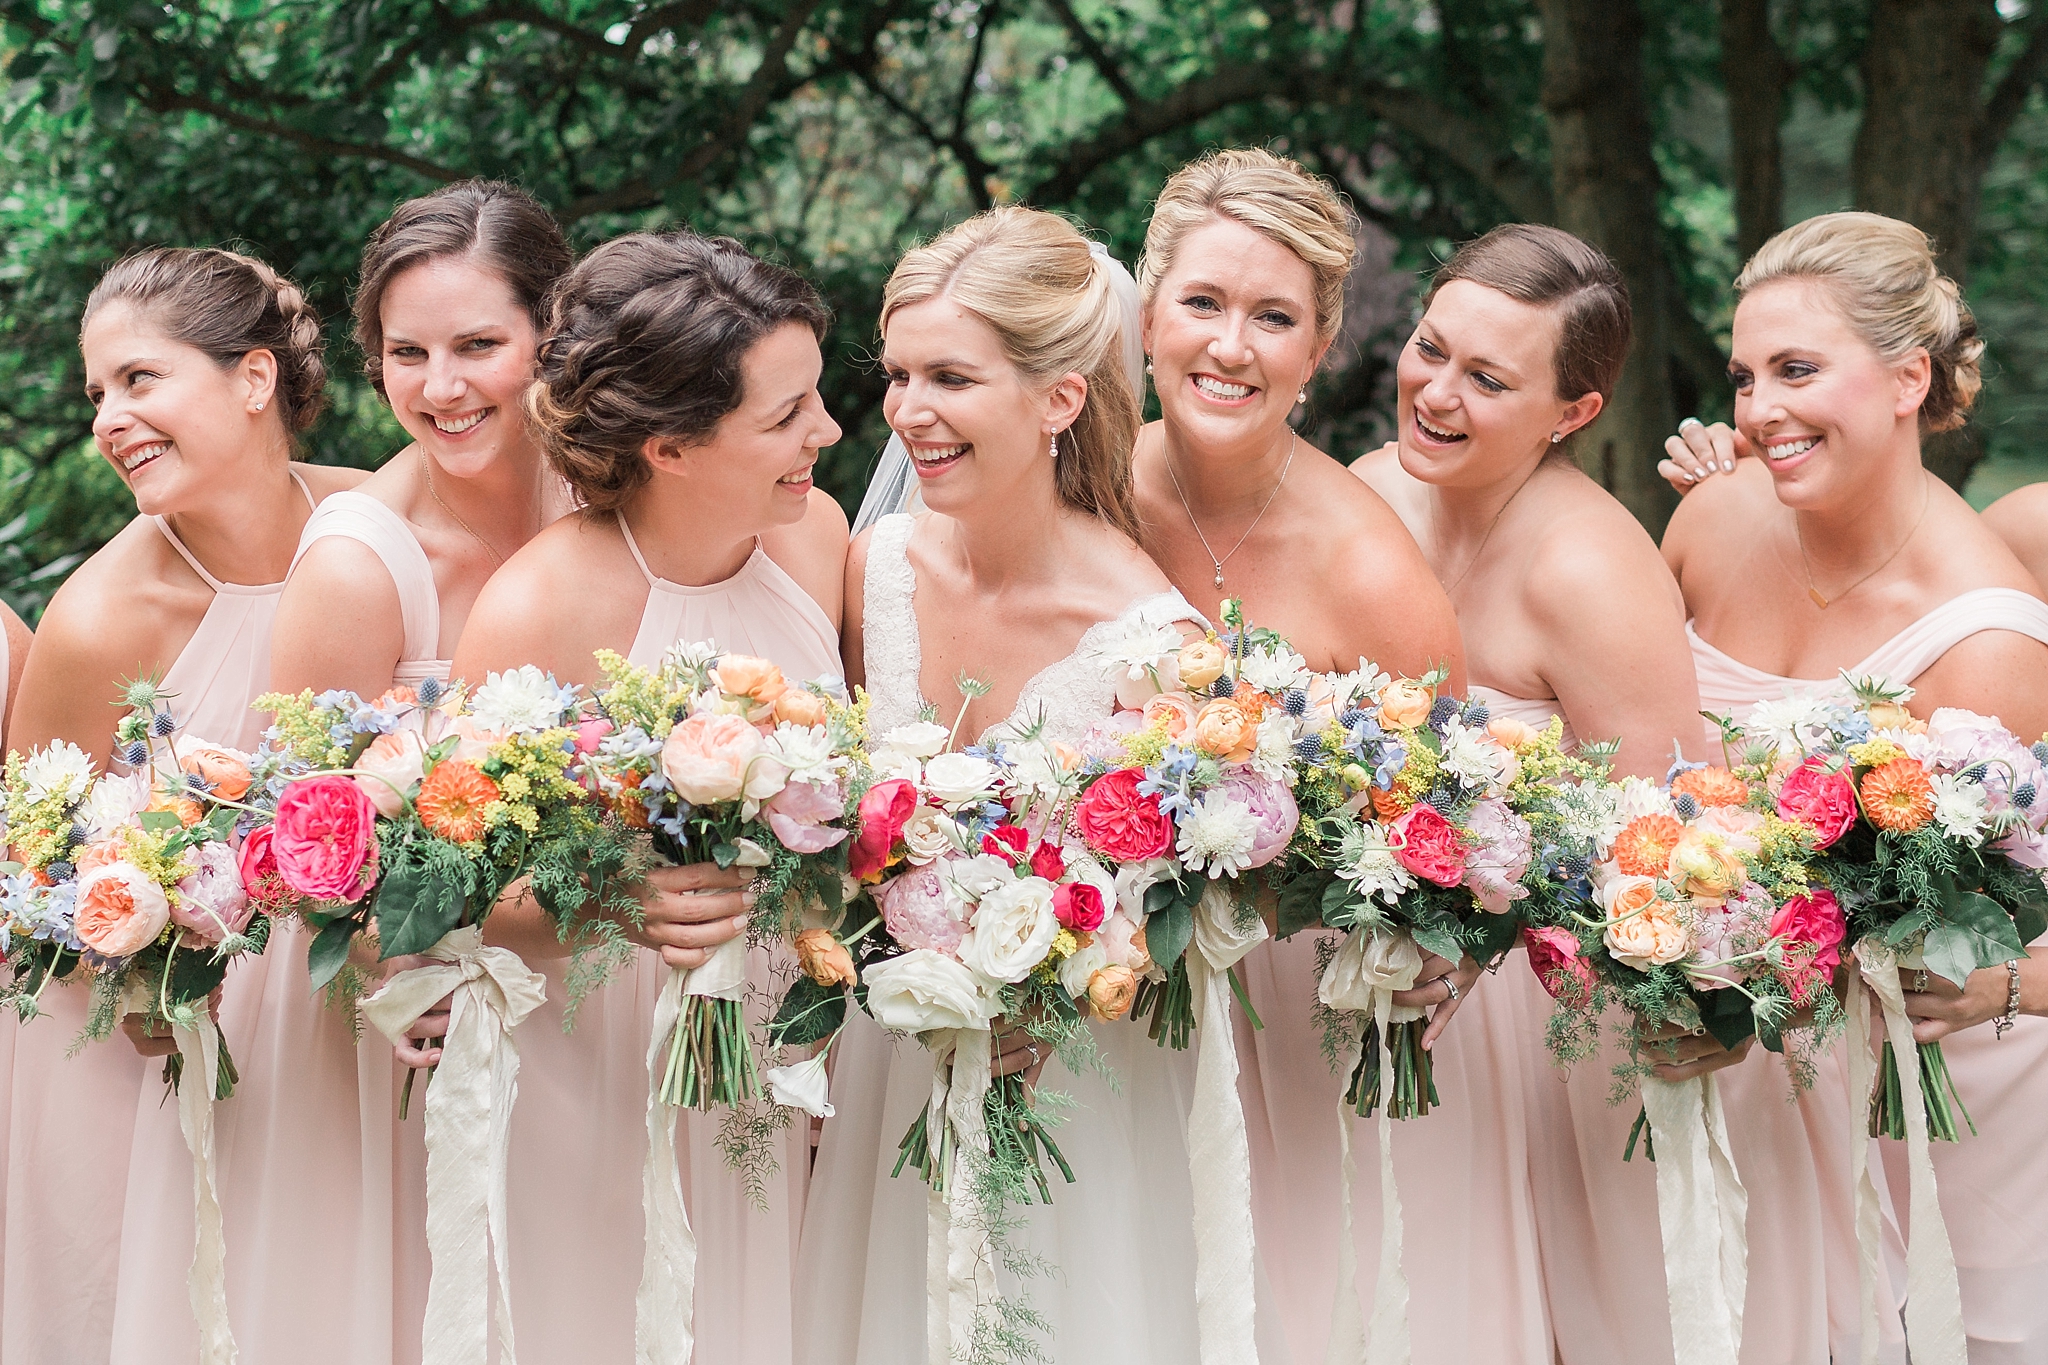 Don't want to blend in with your white dress but scared of a spray tan? Fear not! Here are 10 tips from a Washington, DC wedding photographer for the perfect glow. 